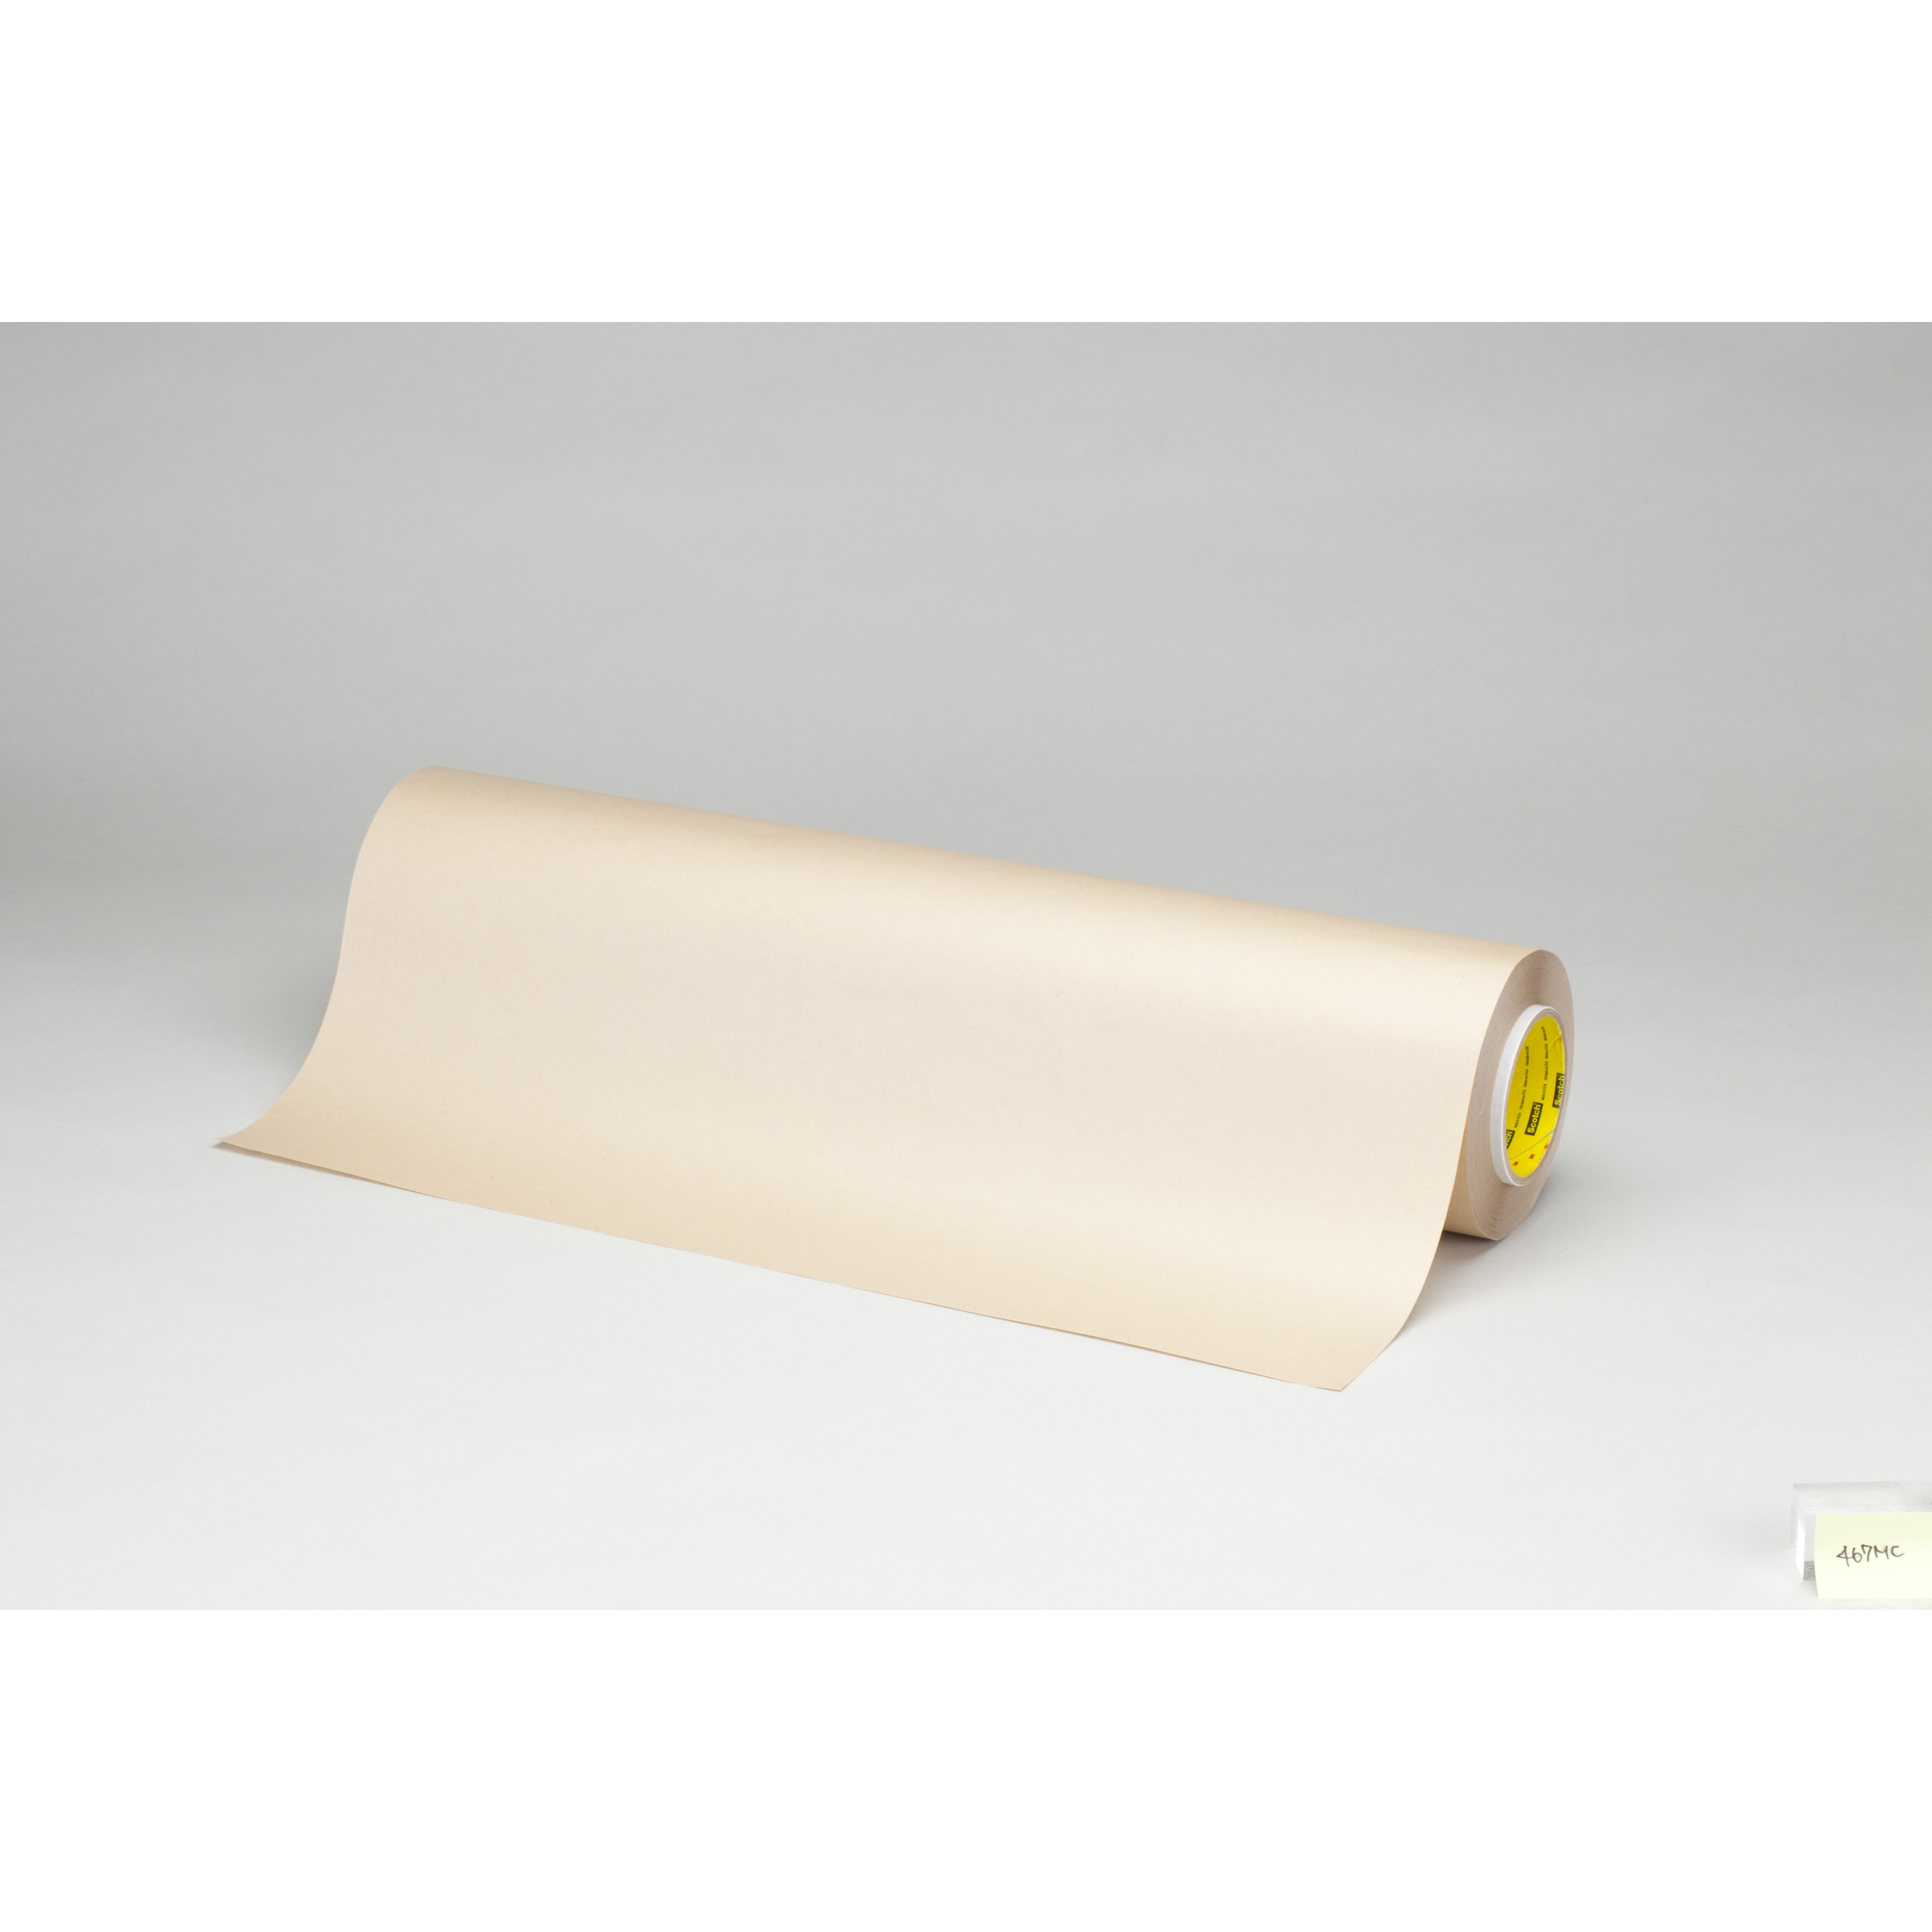 3M™ Adhesive Transfer Tape 468MC, Clear, 48 in x 60 yd, 5 mil, 1 roll
per case